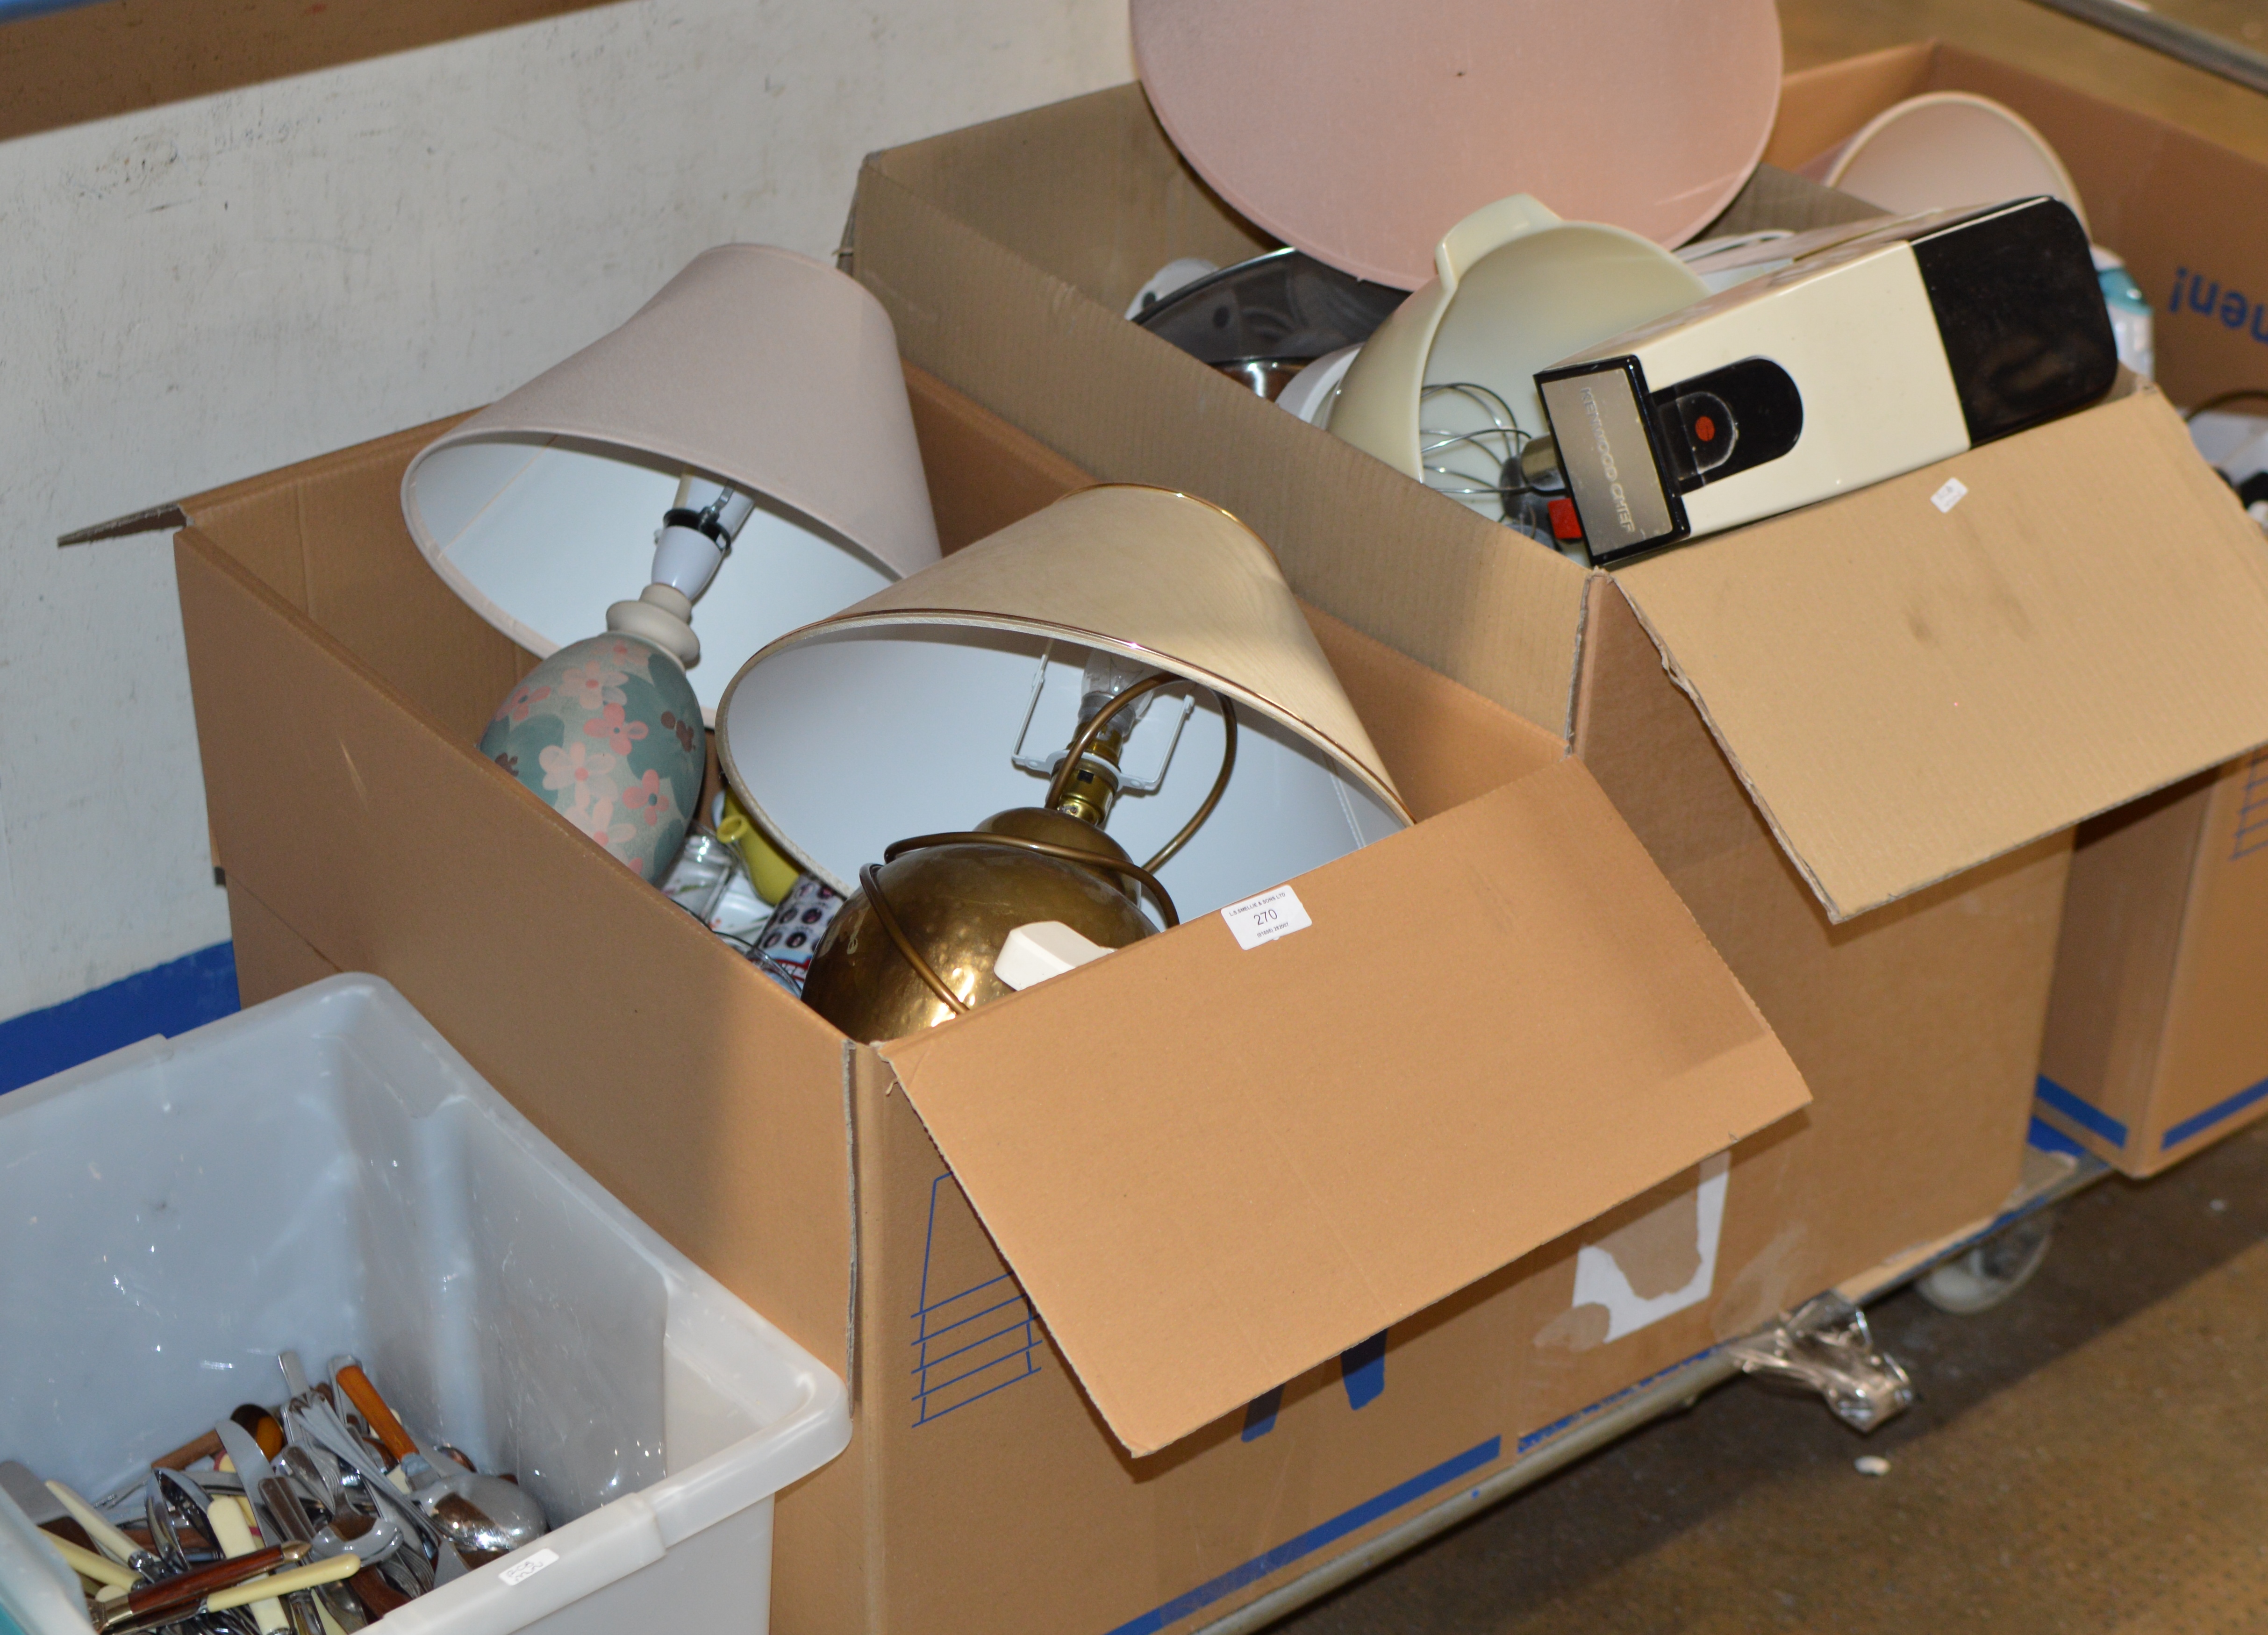 4 BOXES WITH VARIOUS KITCHEN WARE, TABLE LAMPS, VINTAGE MIXER, VARIOUS CUTLERY, DISHES, STEAM